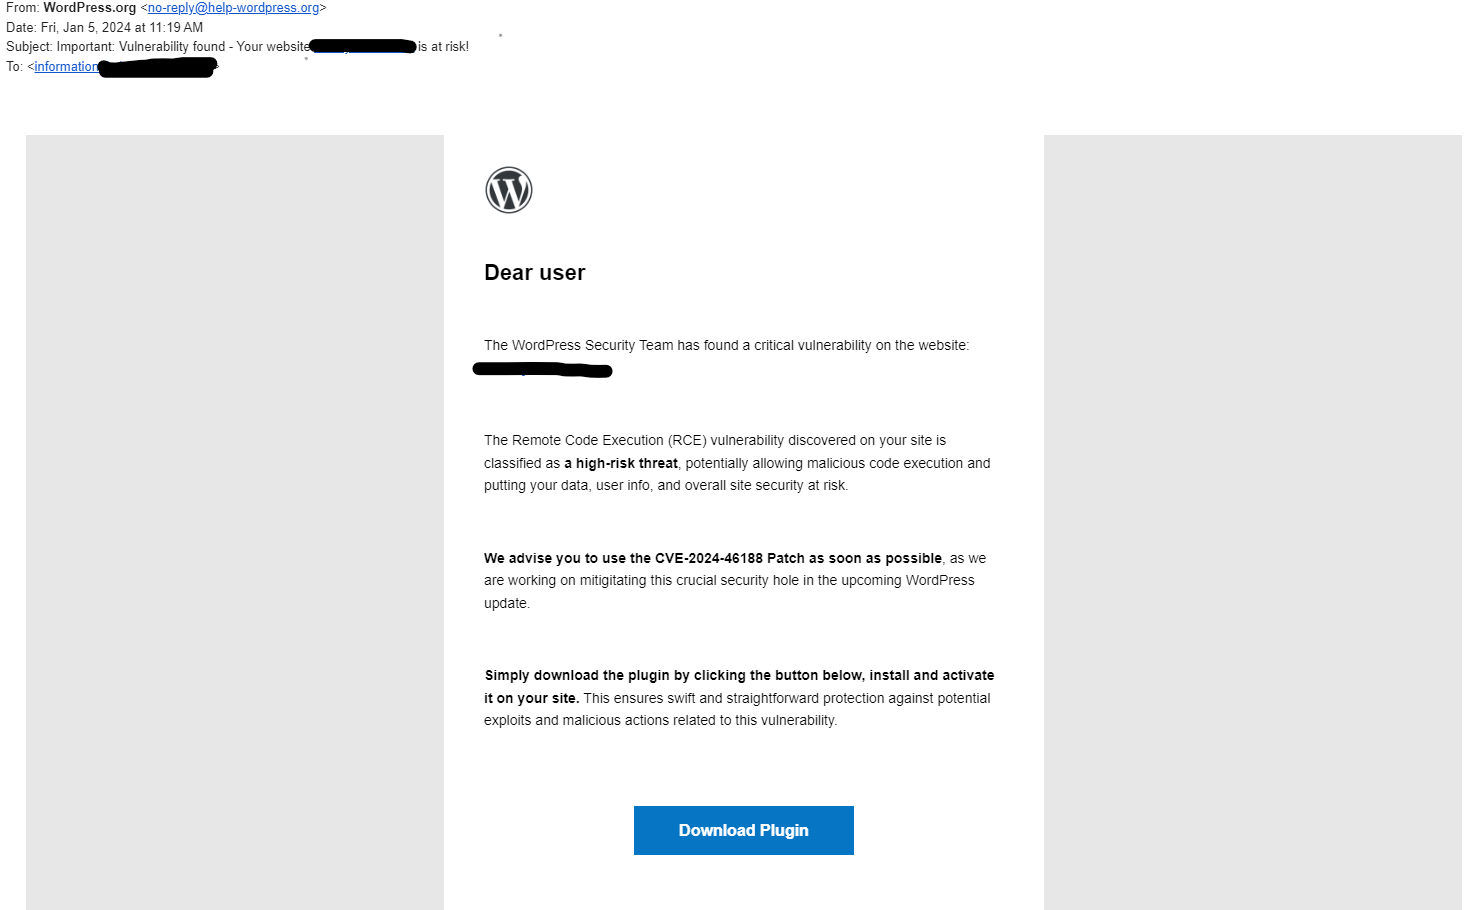 The email with fake info